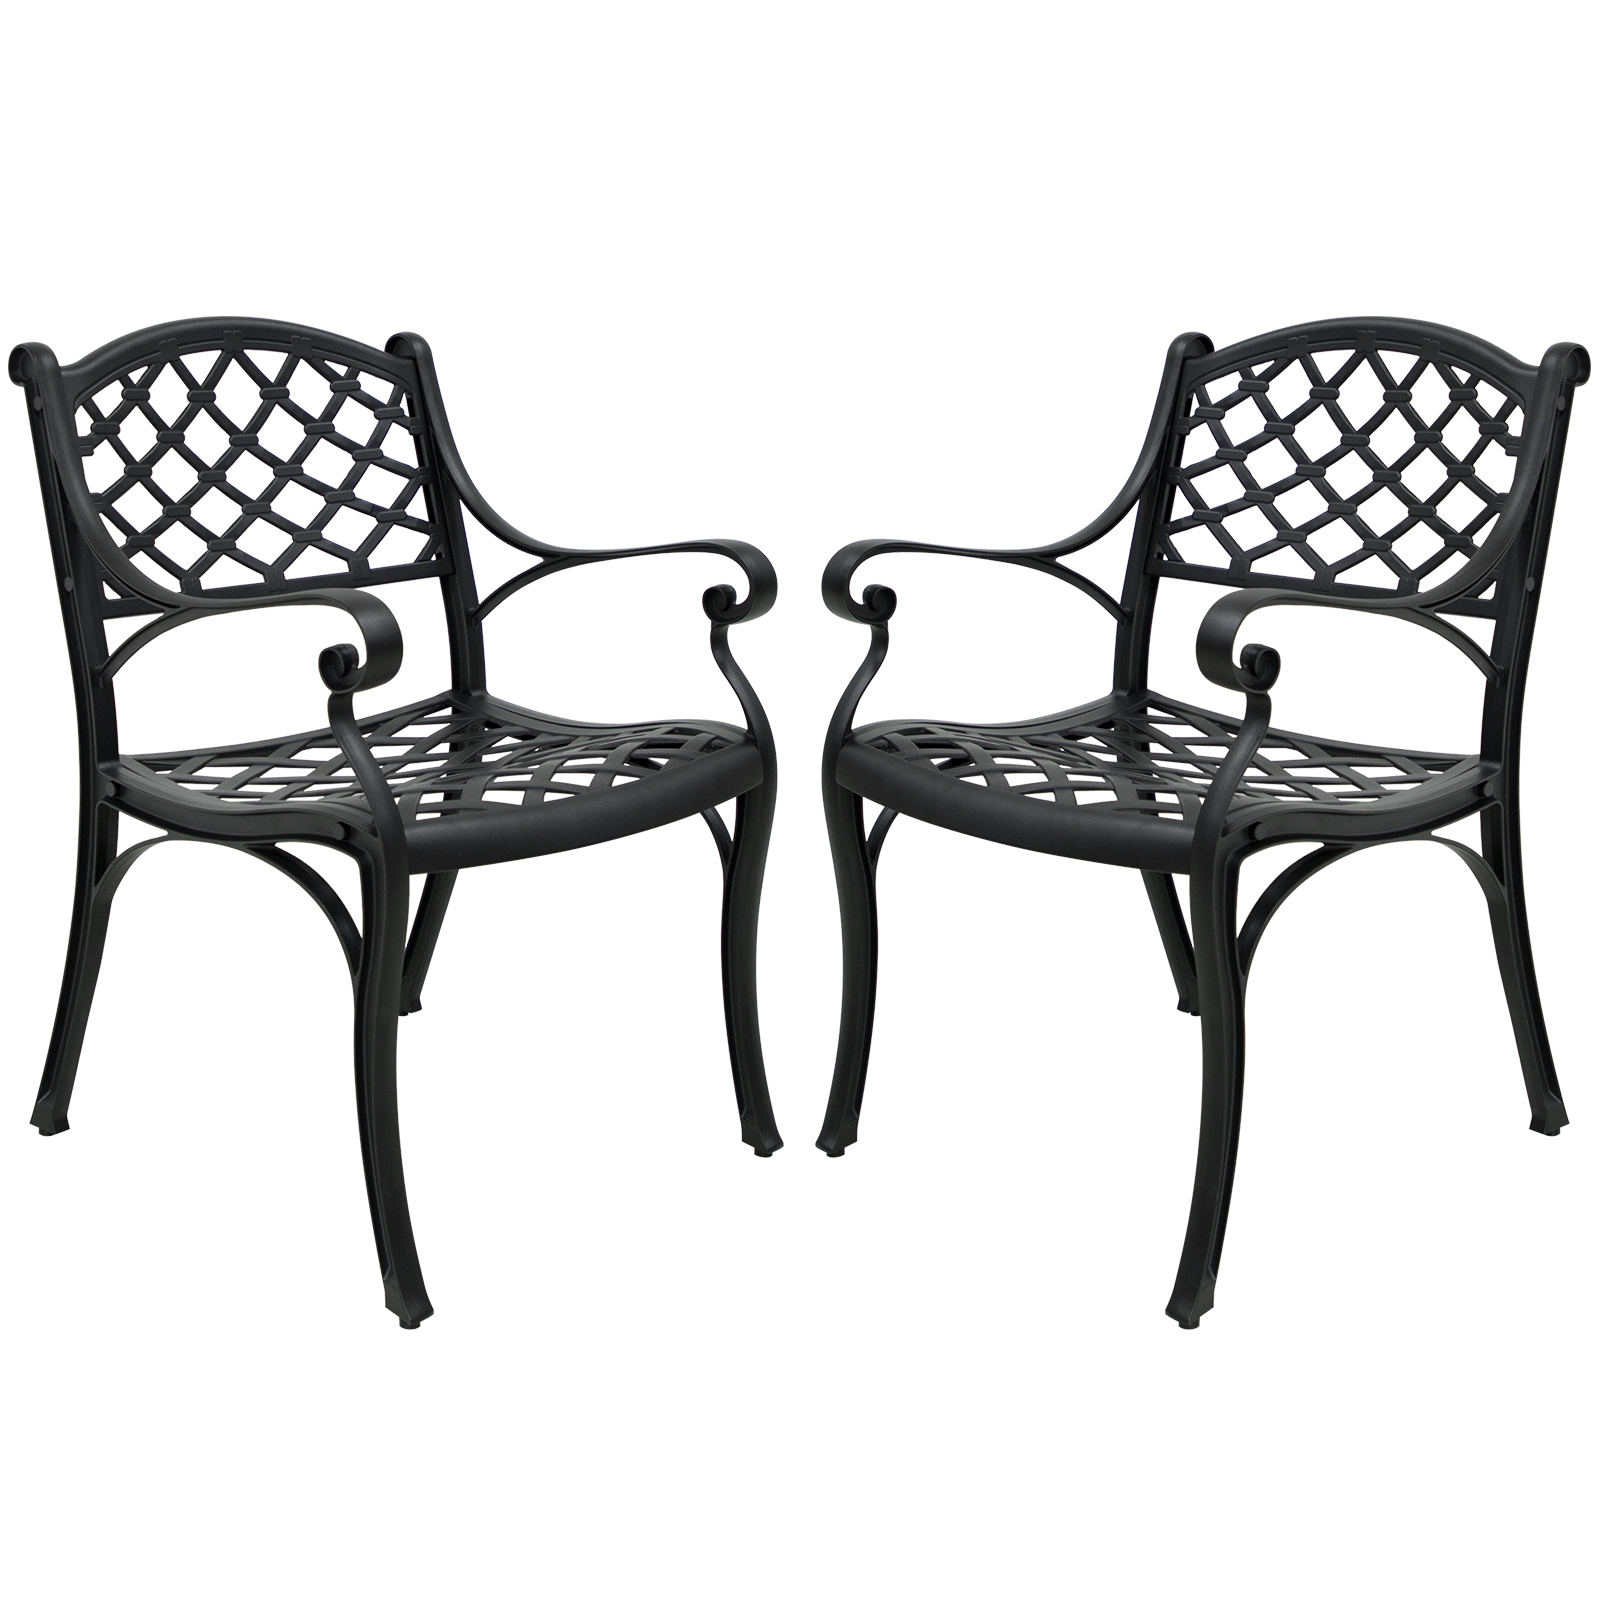 CoSoTower 2 Piece Outdoor Dining Chairs, Cast Aluminum Chairs With Armrest, Patio Bistro Chair Set Of 2 For Garden, Backyard, Lattice Design 2 Chairs - image 1 of 8